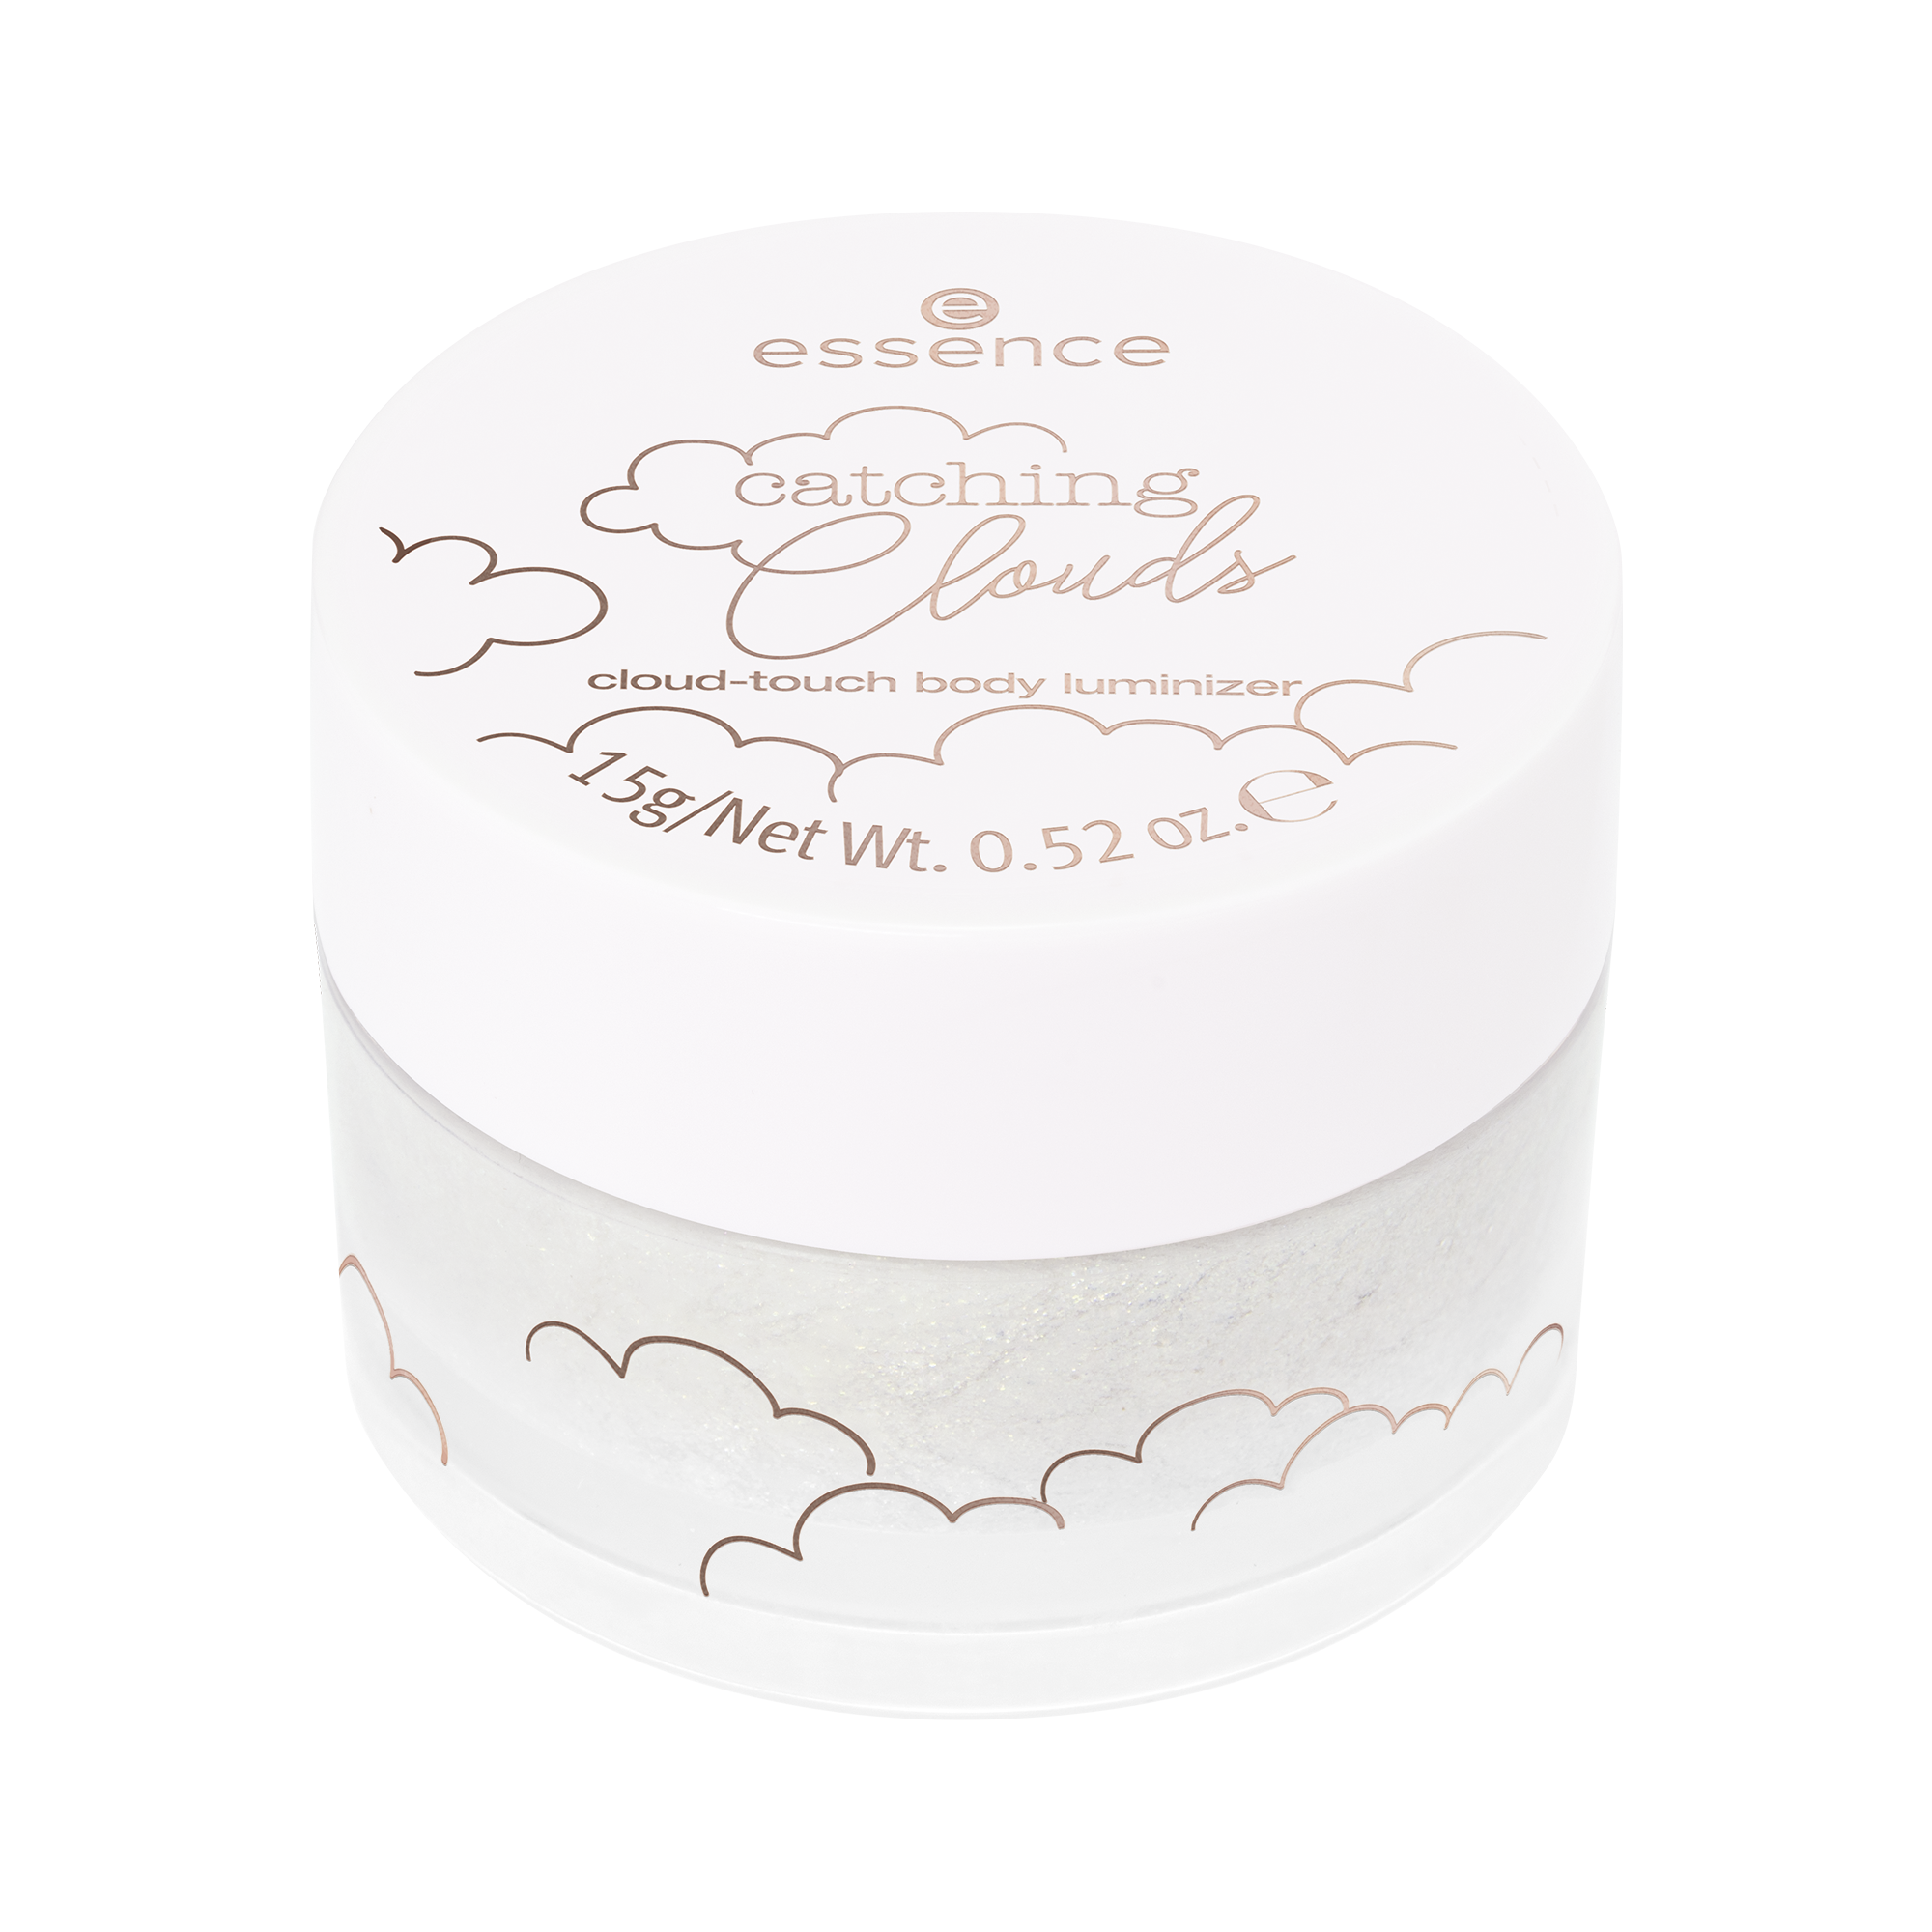 catching Clouds cloud-touch body luminizer